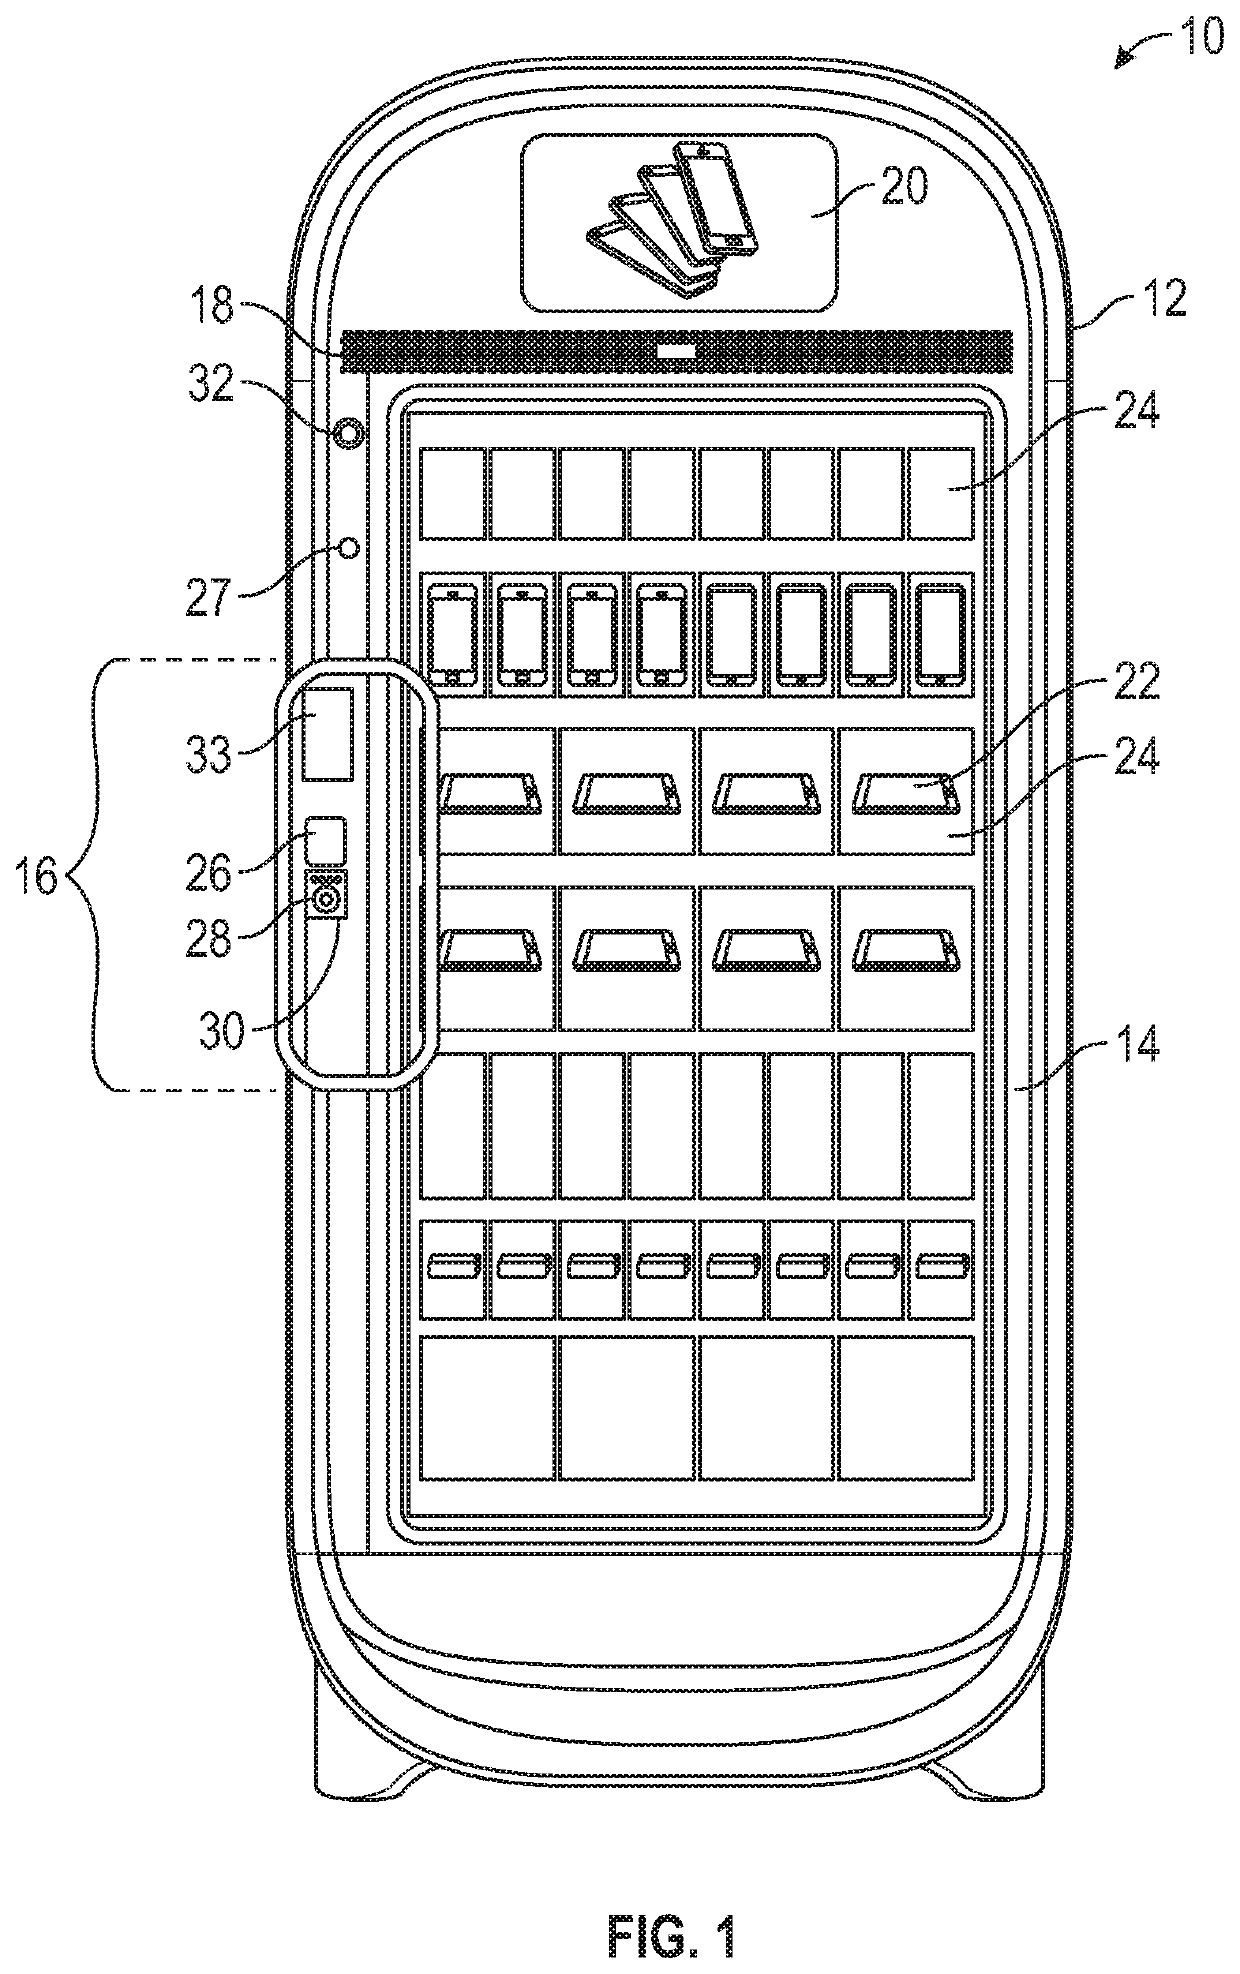 System and method of individualized merchandising in an automatic retail device